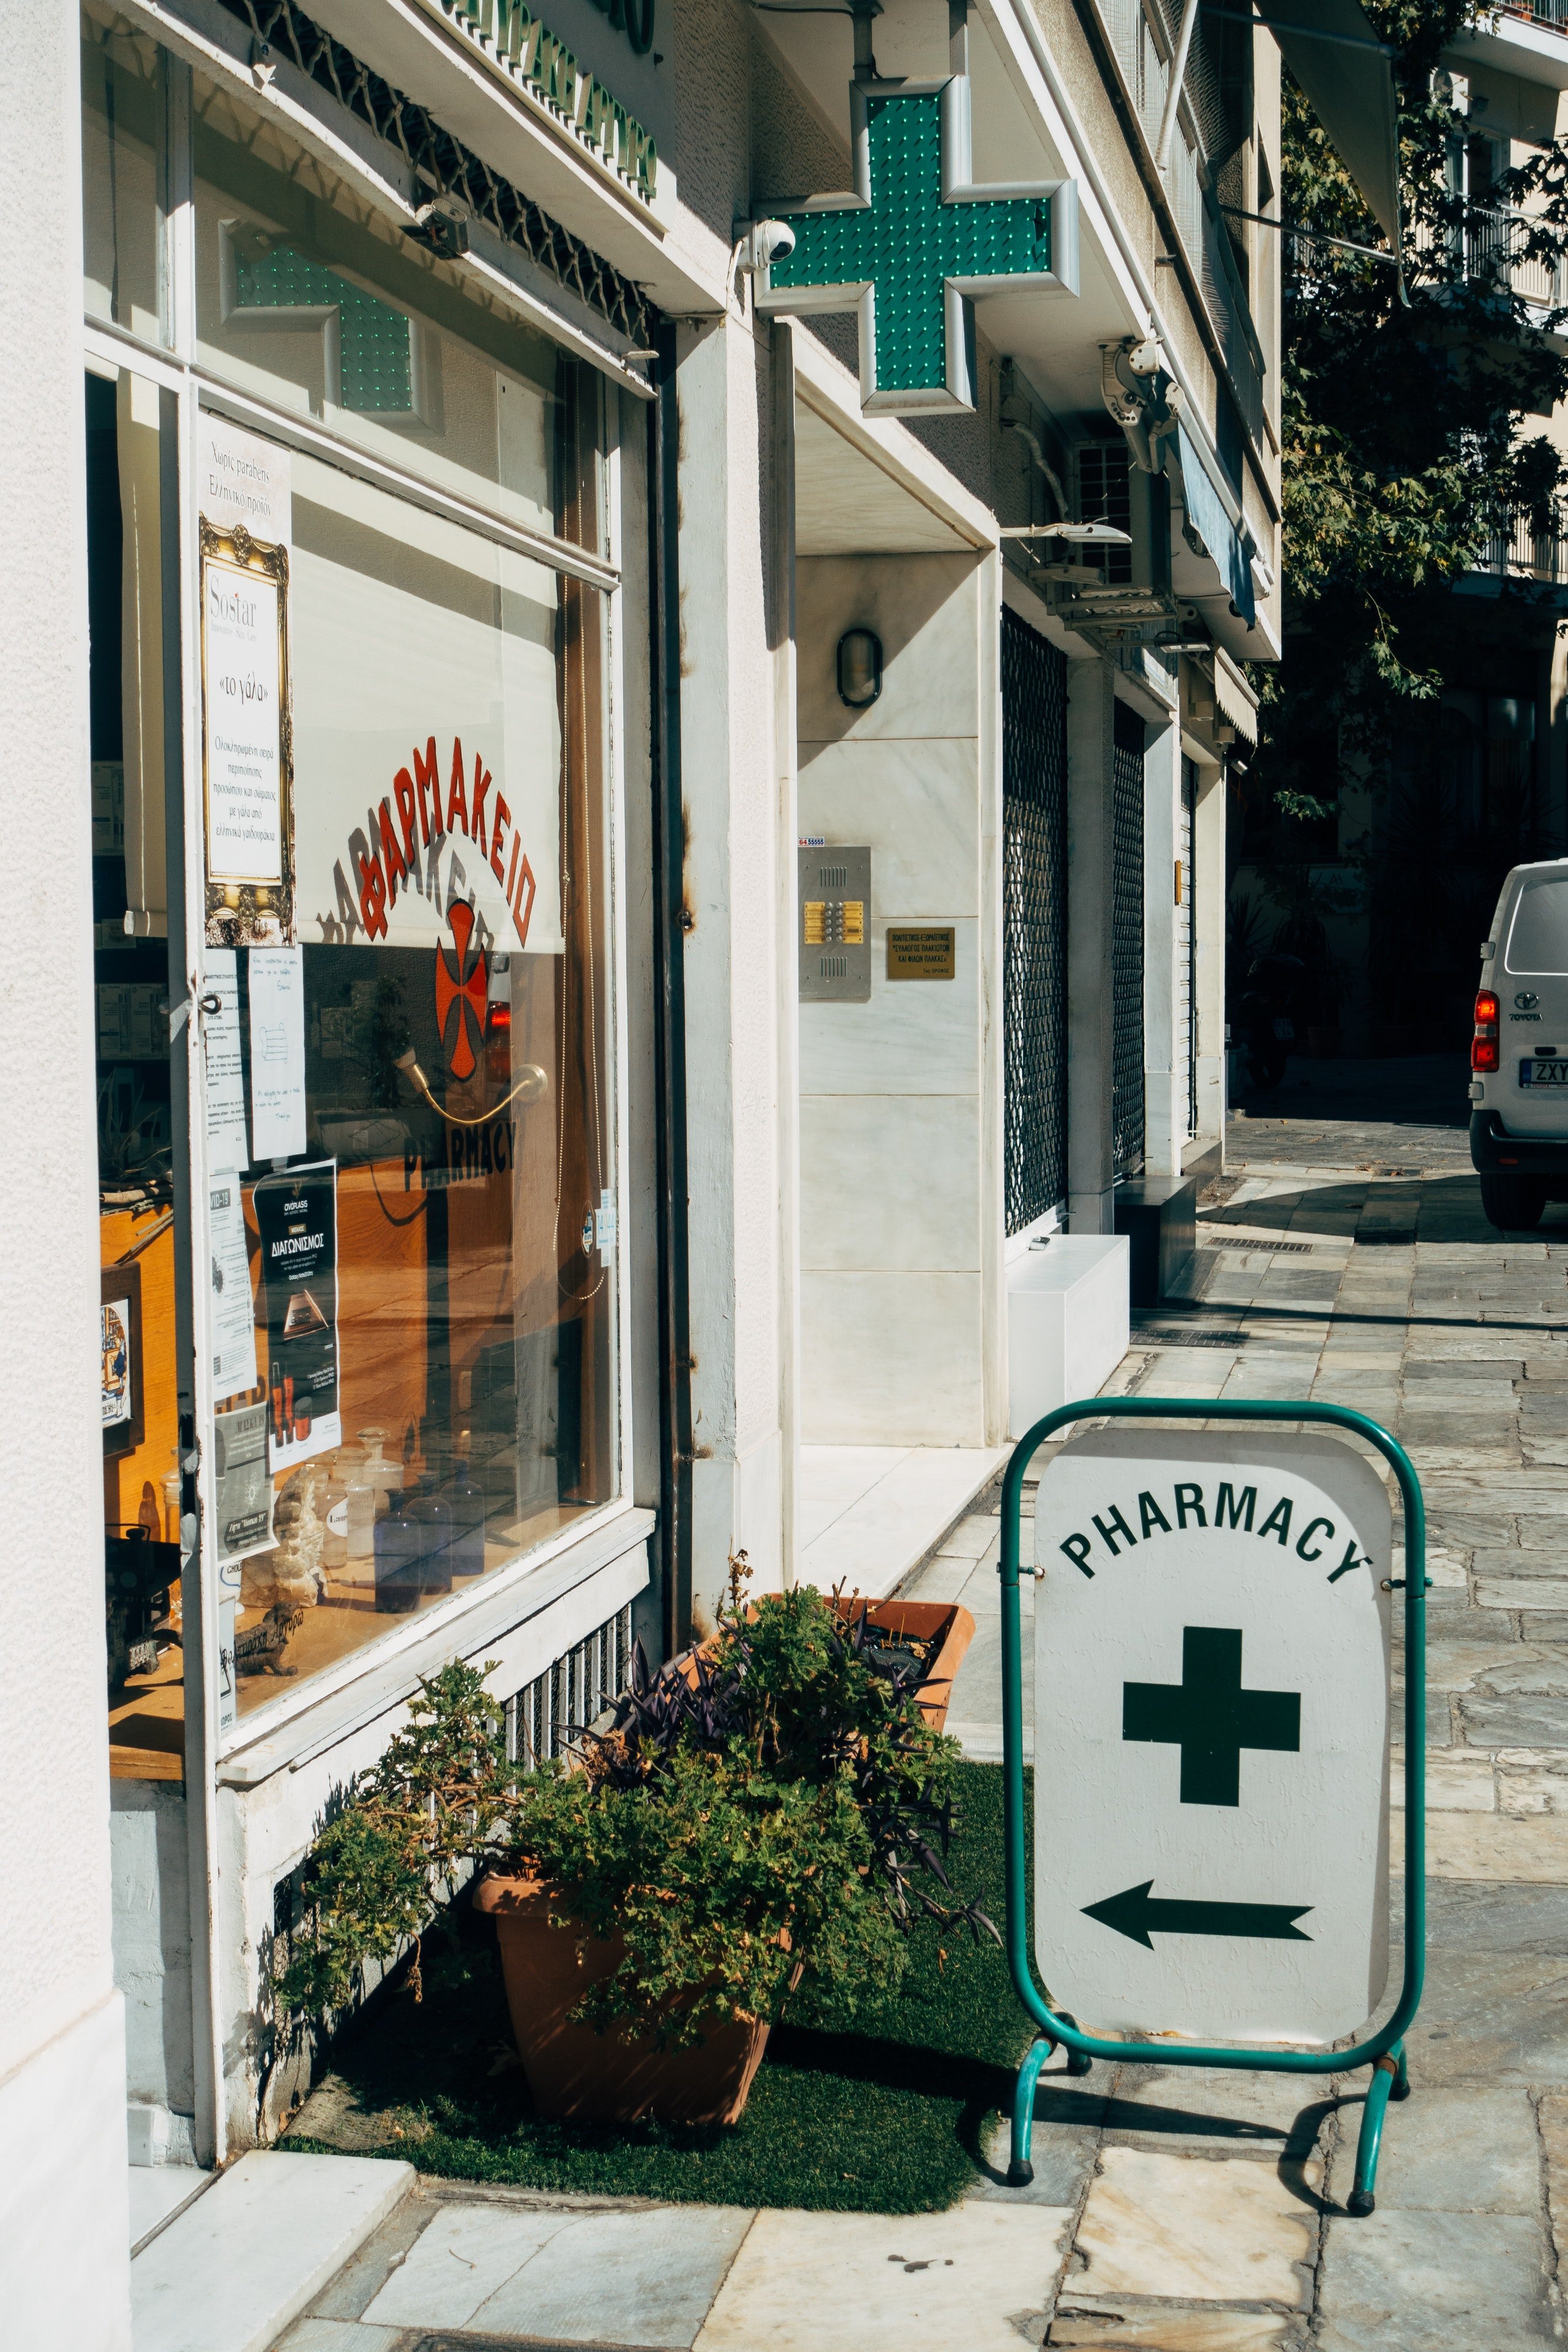 A pharmacy by the road. | Photo: Pexels/Markus Winkler